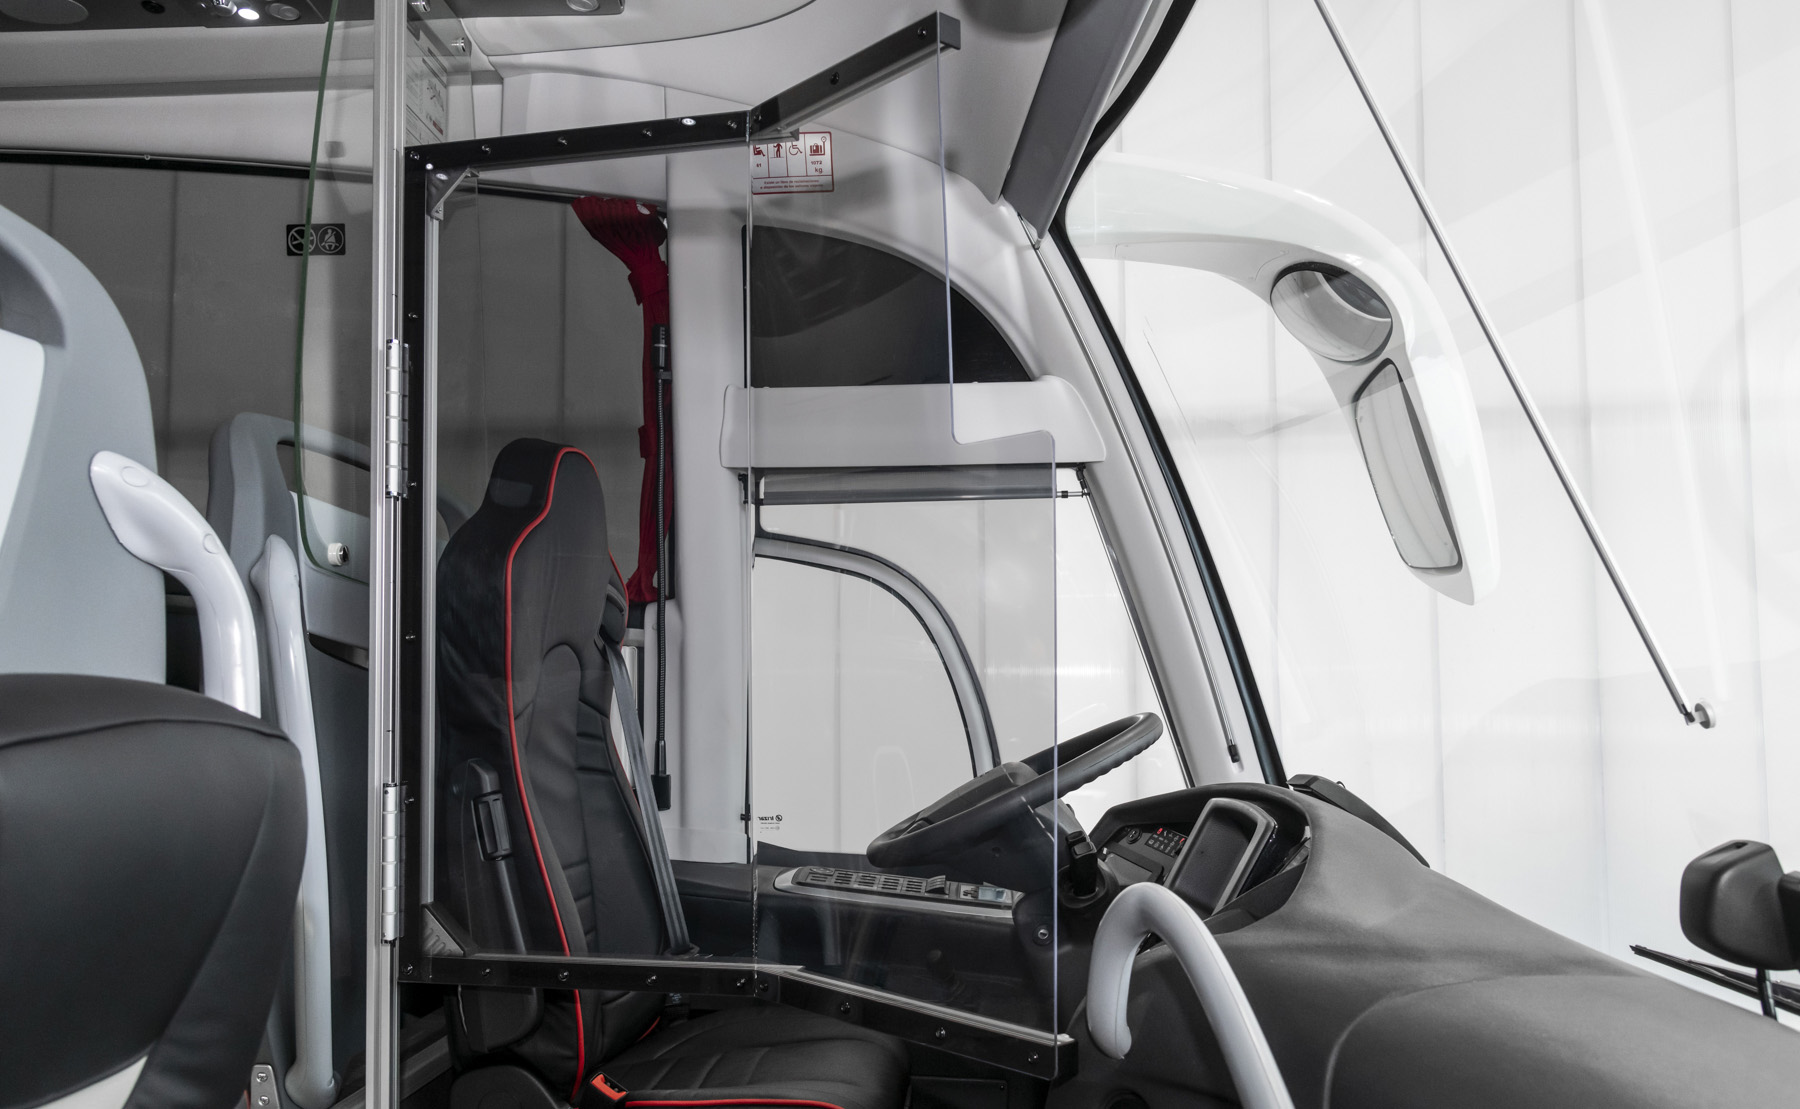 Driver’s compartment partition panel, passenger seat protection panels and air purifier for minimising the risk of Covid-19 infection